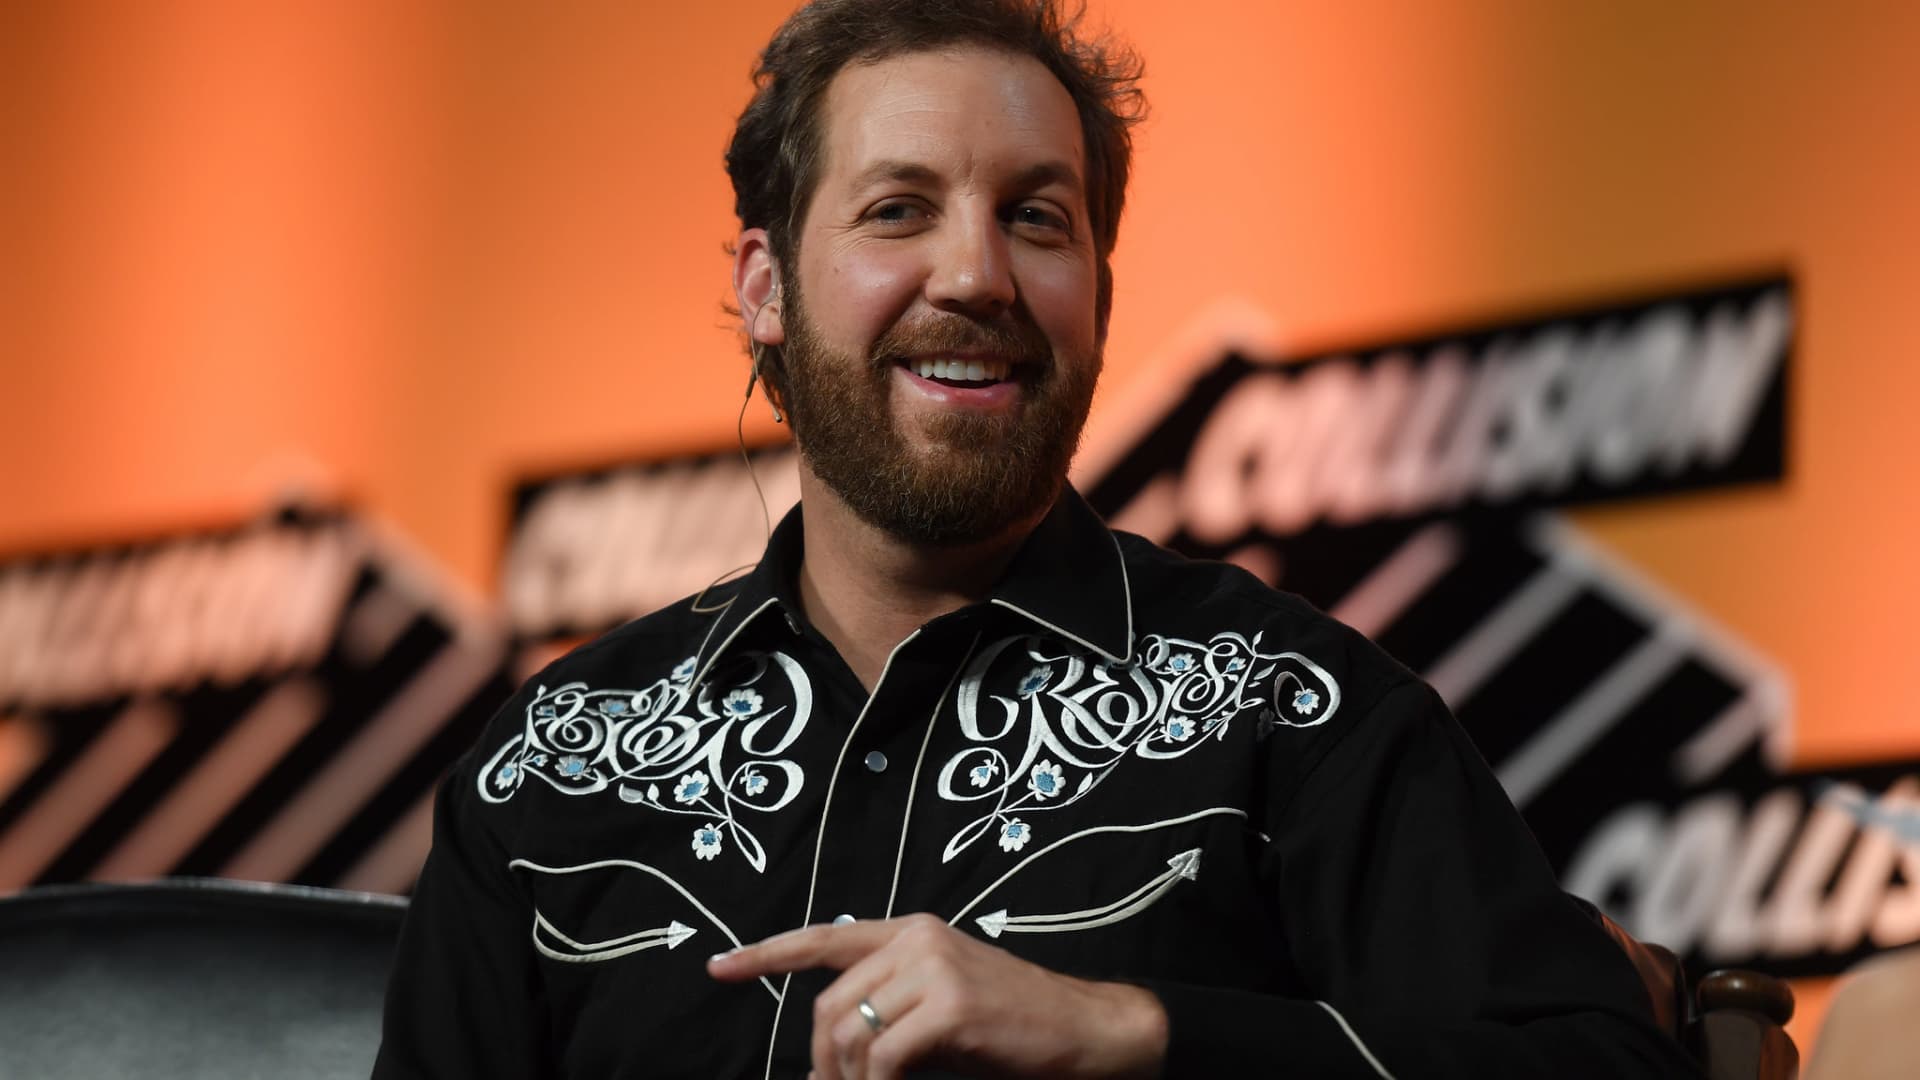 Twitter early investor Chris Sacca says Elon Musk is 'alone right now and winging this'